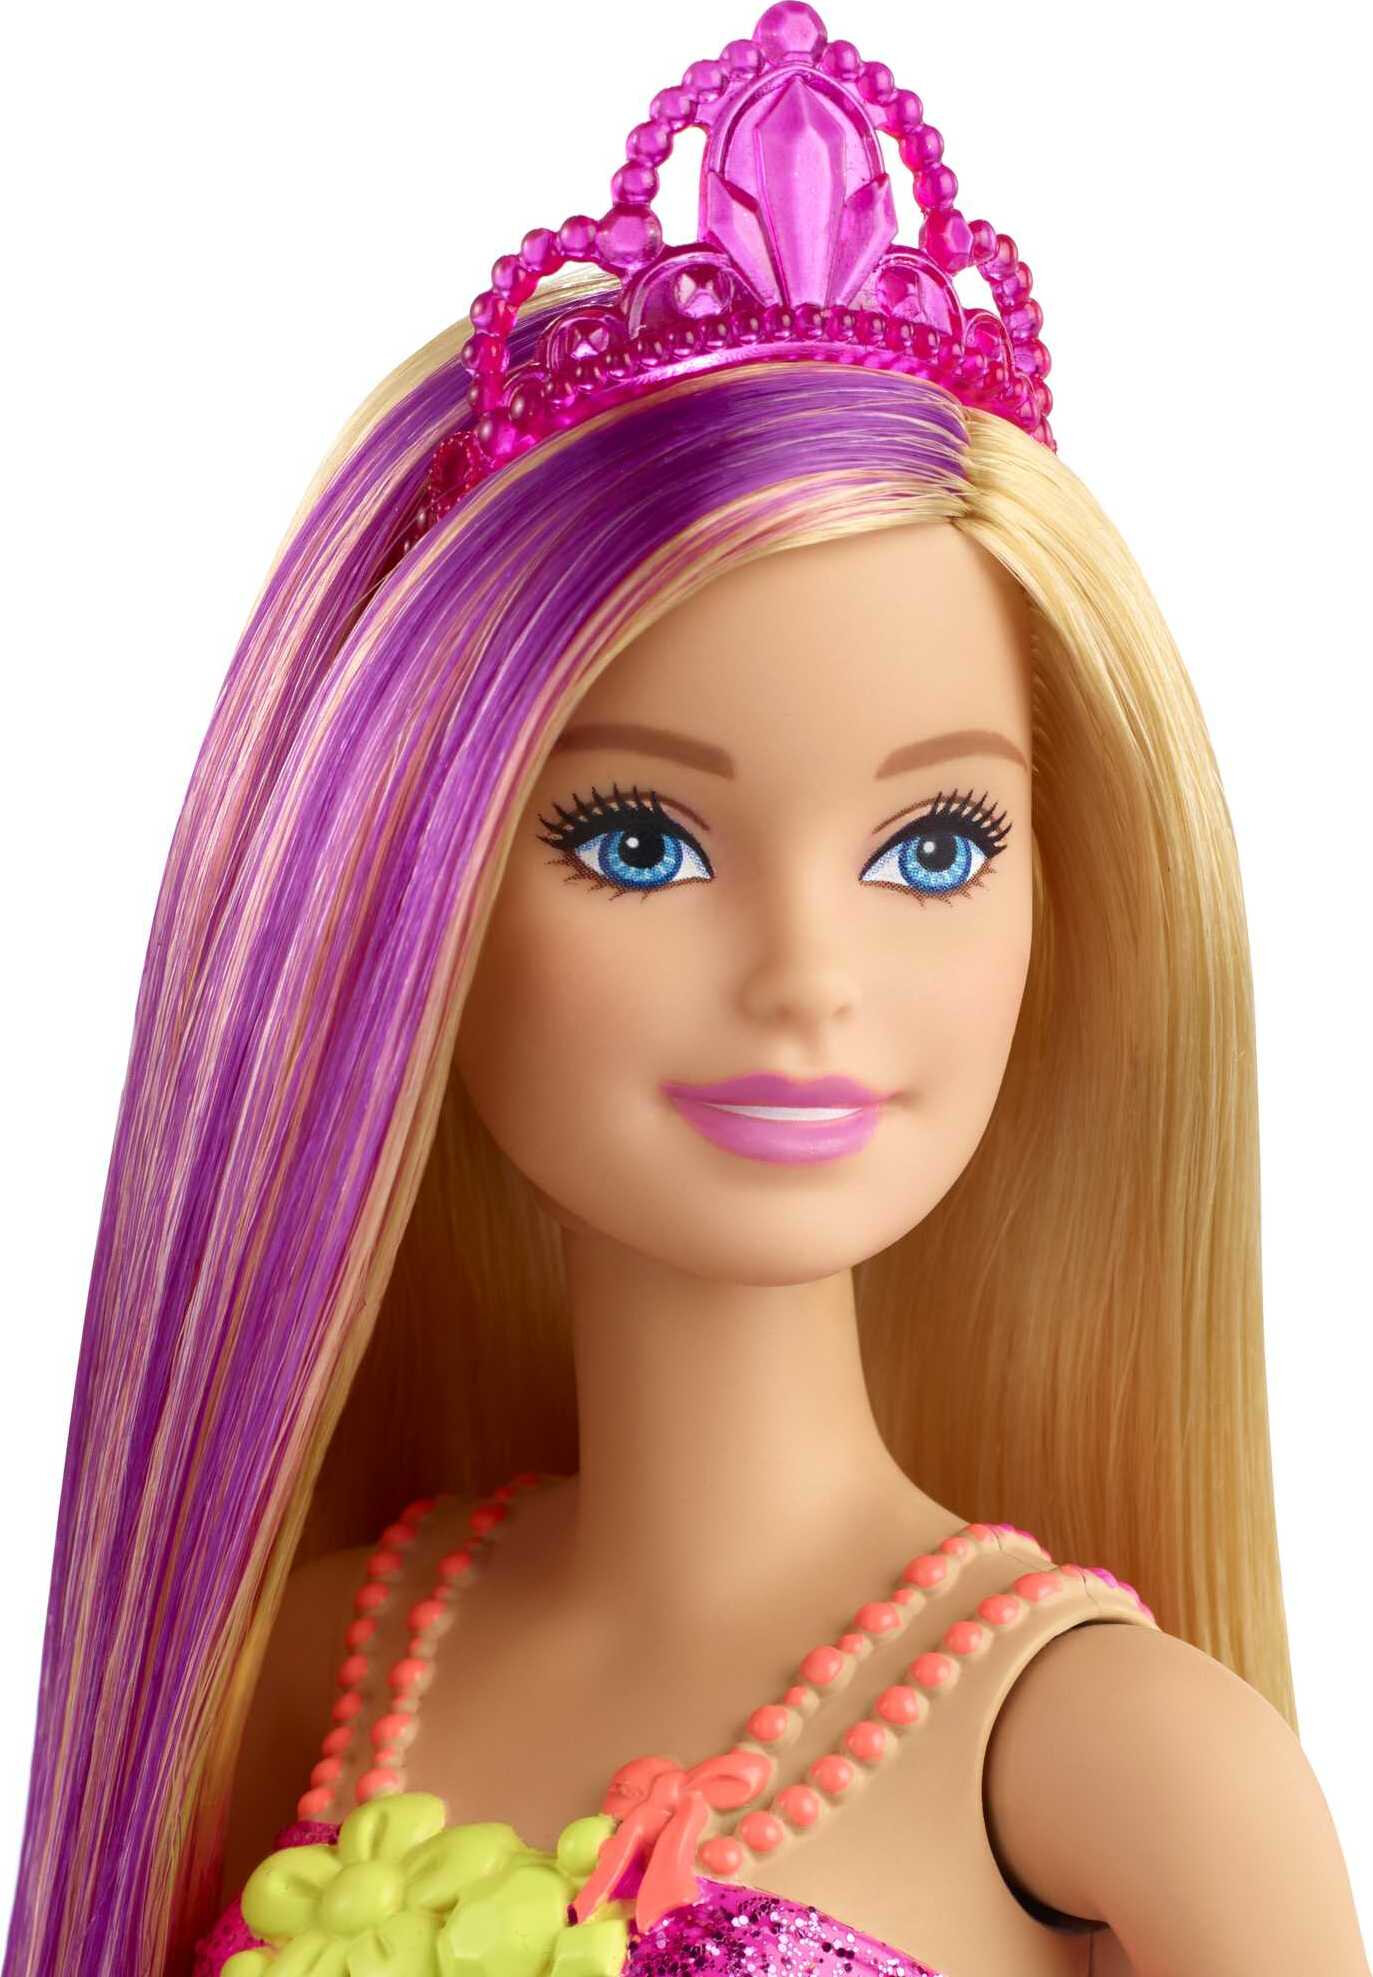 Barbie Dreamtopia Royal Doll with Blonde Hair with Purple Streak & Accessories - image 3 of 6